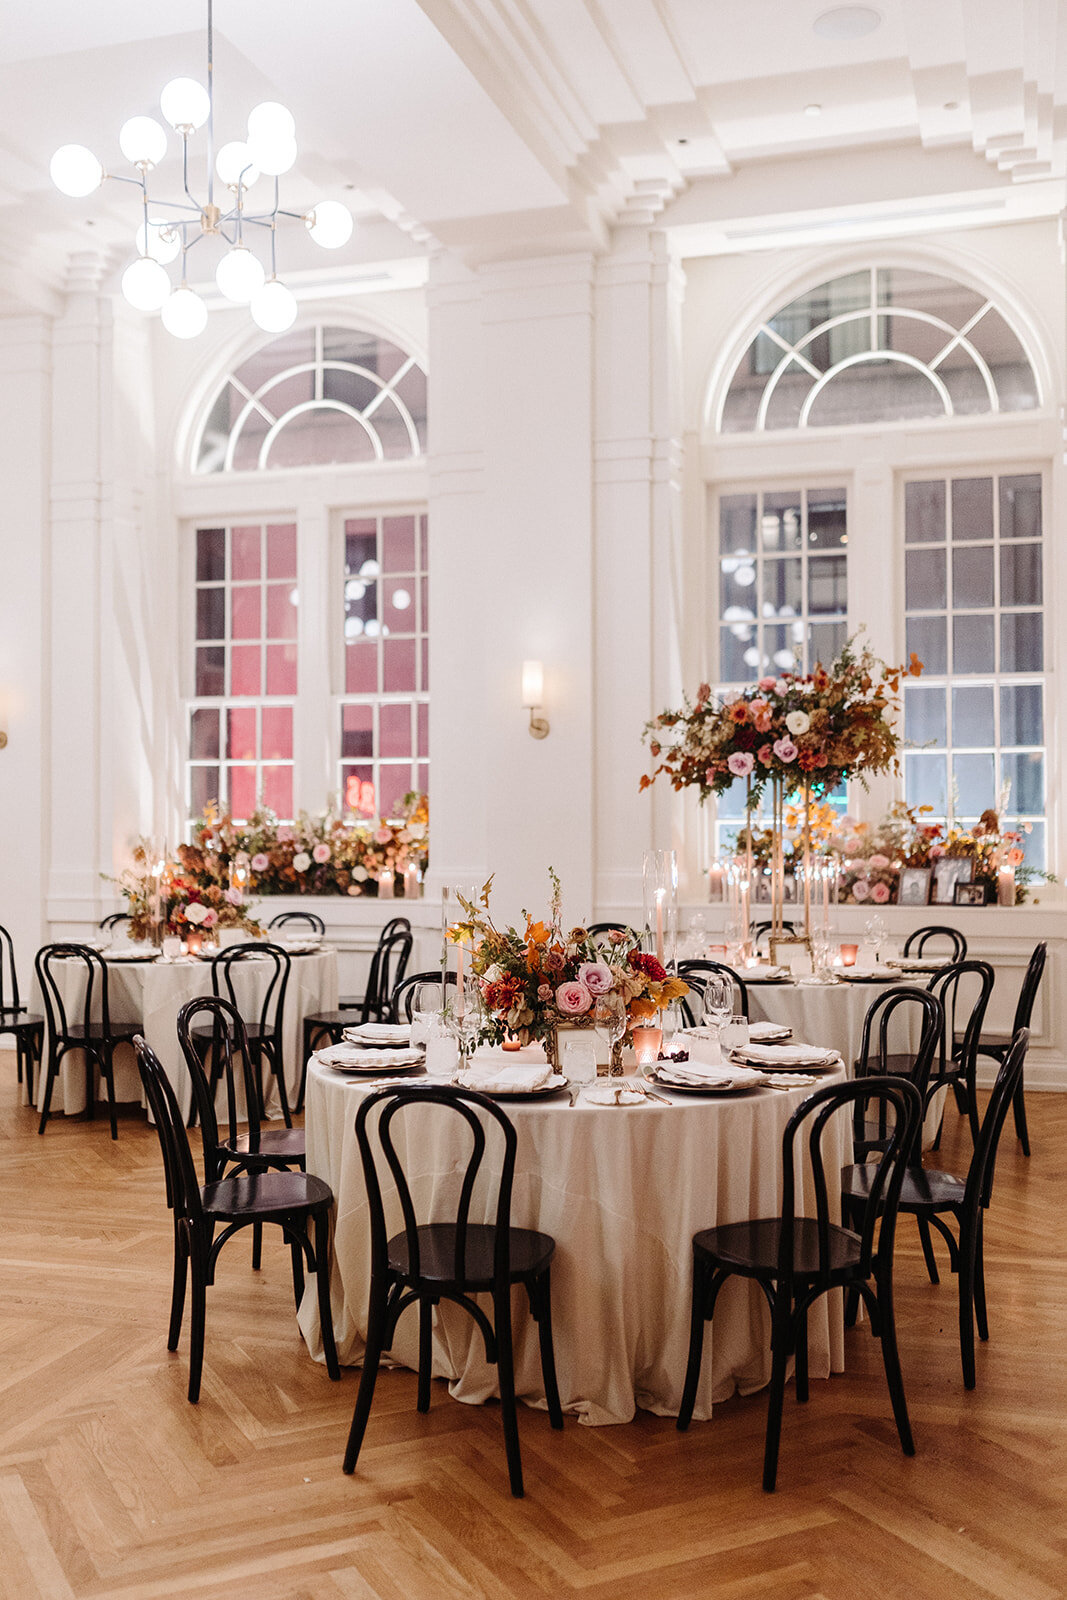 Organic floral centerpieces decorate this autumnal Parisian inspired wedding reception in hues of dusty rose, burgundy, terra cotta, and lavender composed of roses, ranunculus, delphinium, lisianthus, copper beech, and fall foliage. Design by Rosemary and Finch in Nashville, TN.